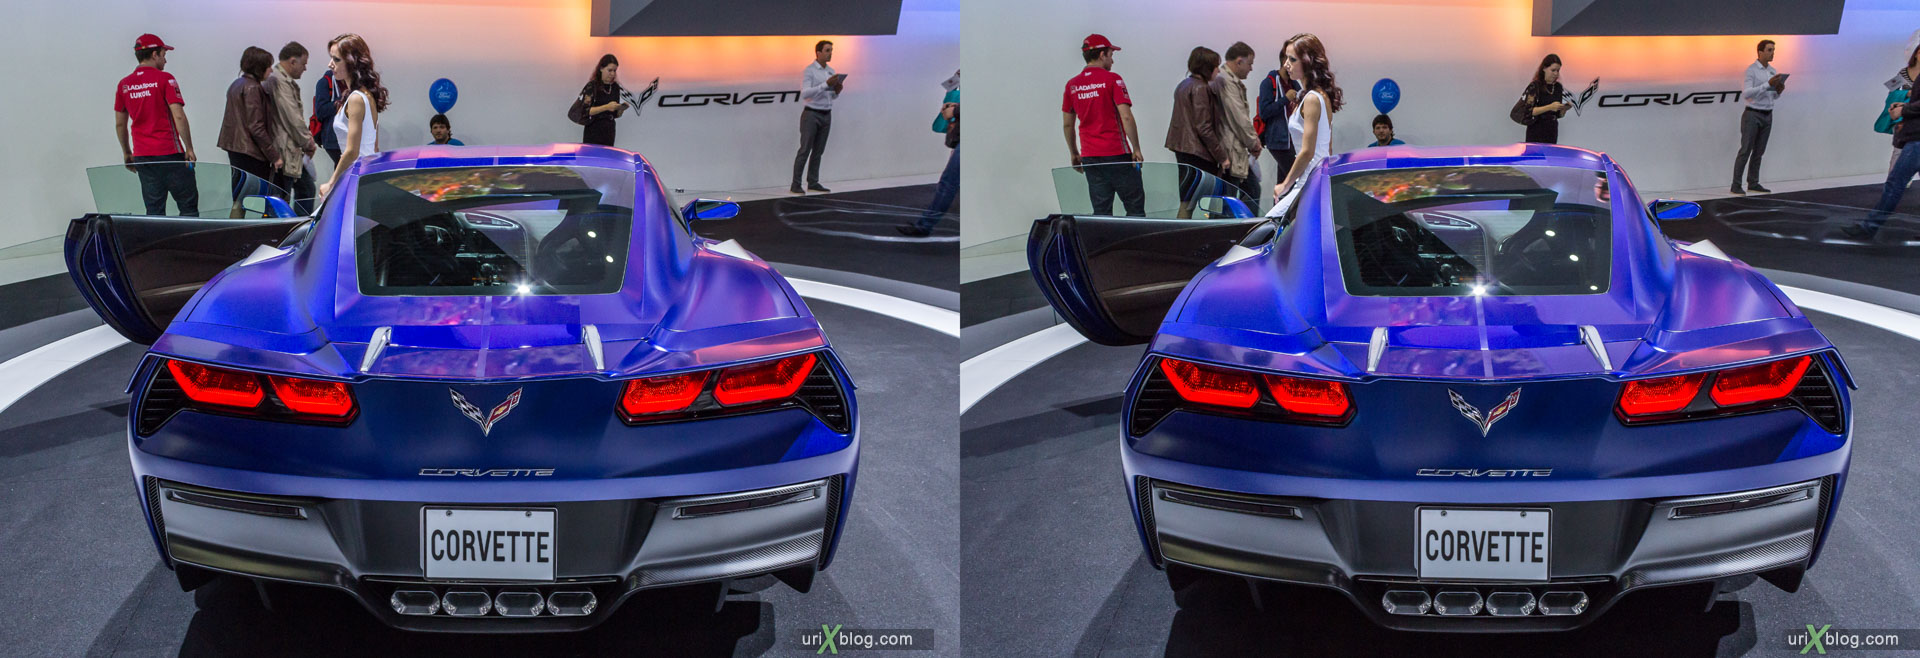 Chevrolet Corvette, Moscow International Automobile Salon 2014, MIAS 2014, girls, models, Crocus Expo, Moscow, Russia, 3D, stereo pair, cross-eyed, crossview, cross view stereo pair, stereoscopic, 2014